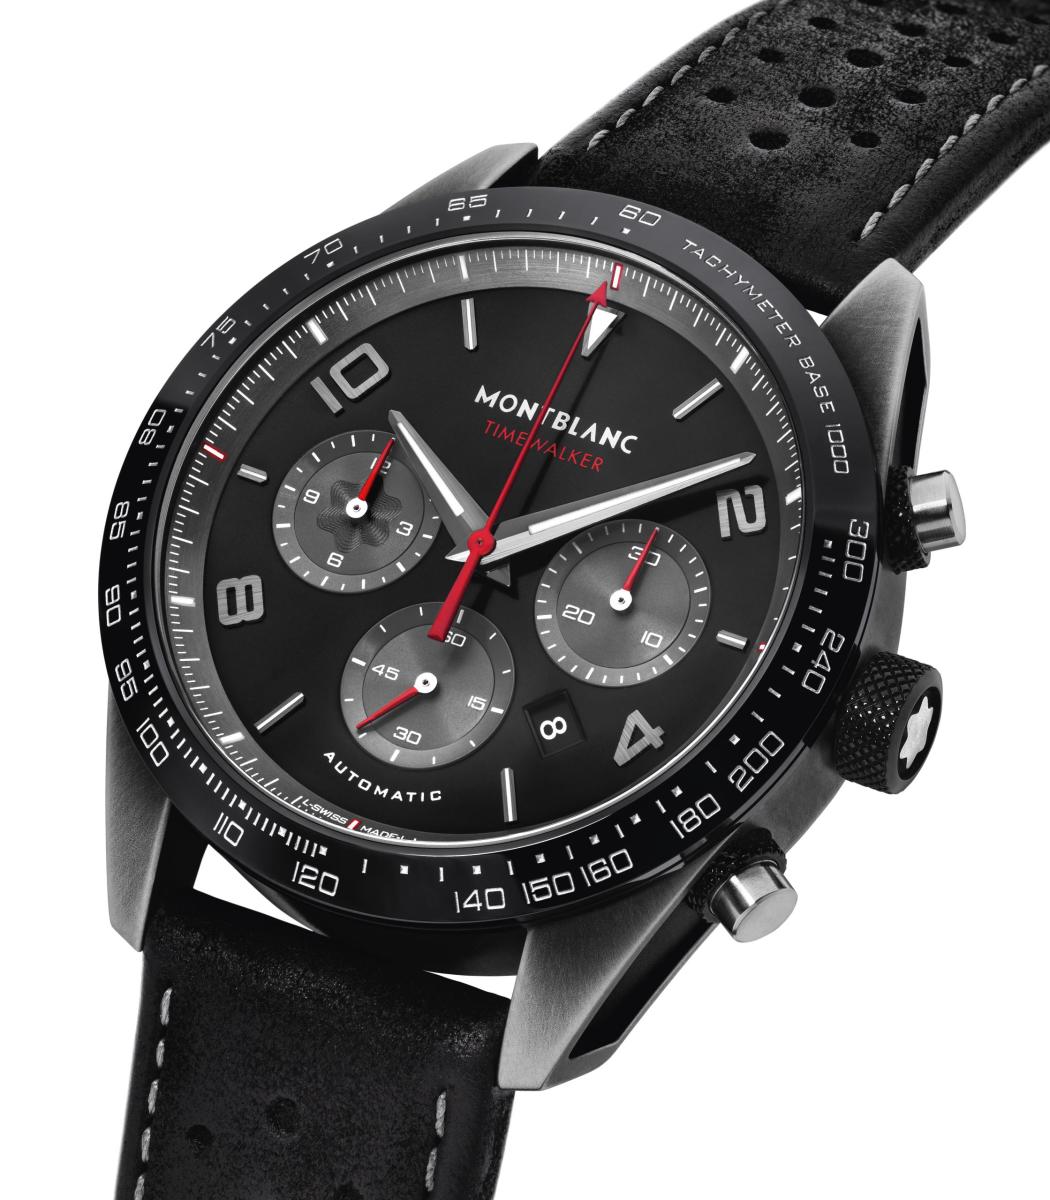 Montblanc TimeWalker Manufacture Chronograph Limited Edition